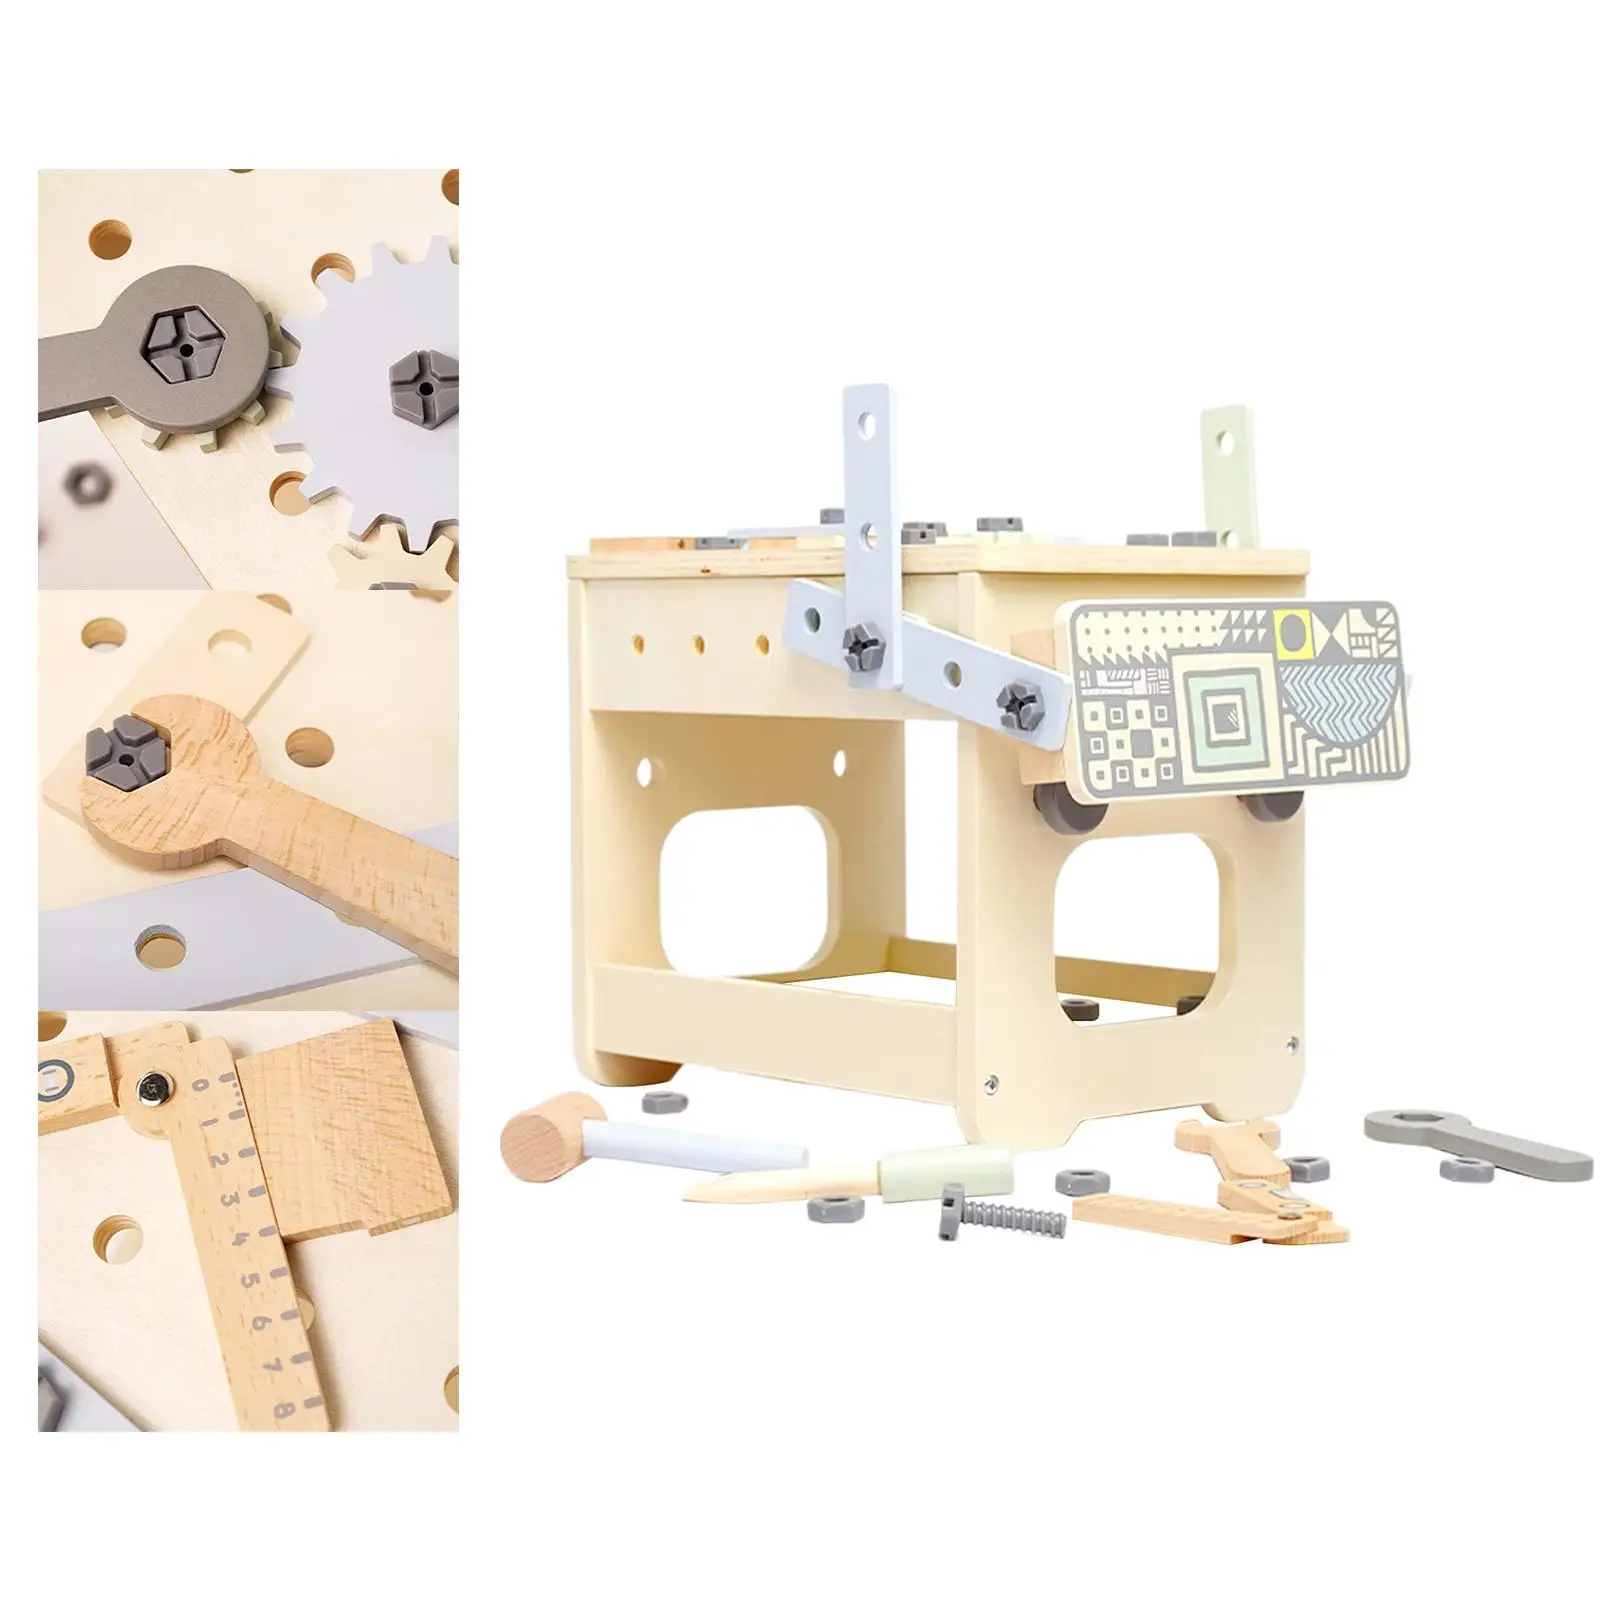 Tool Bench Wooden Toy Construction Toy Set for Indoor Birthday Gift Outdoor